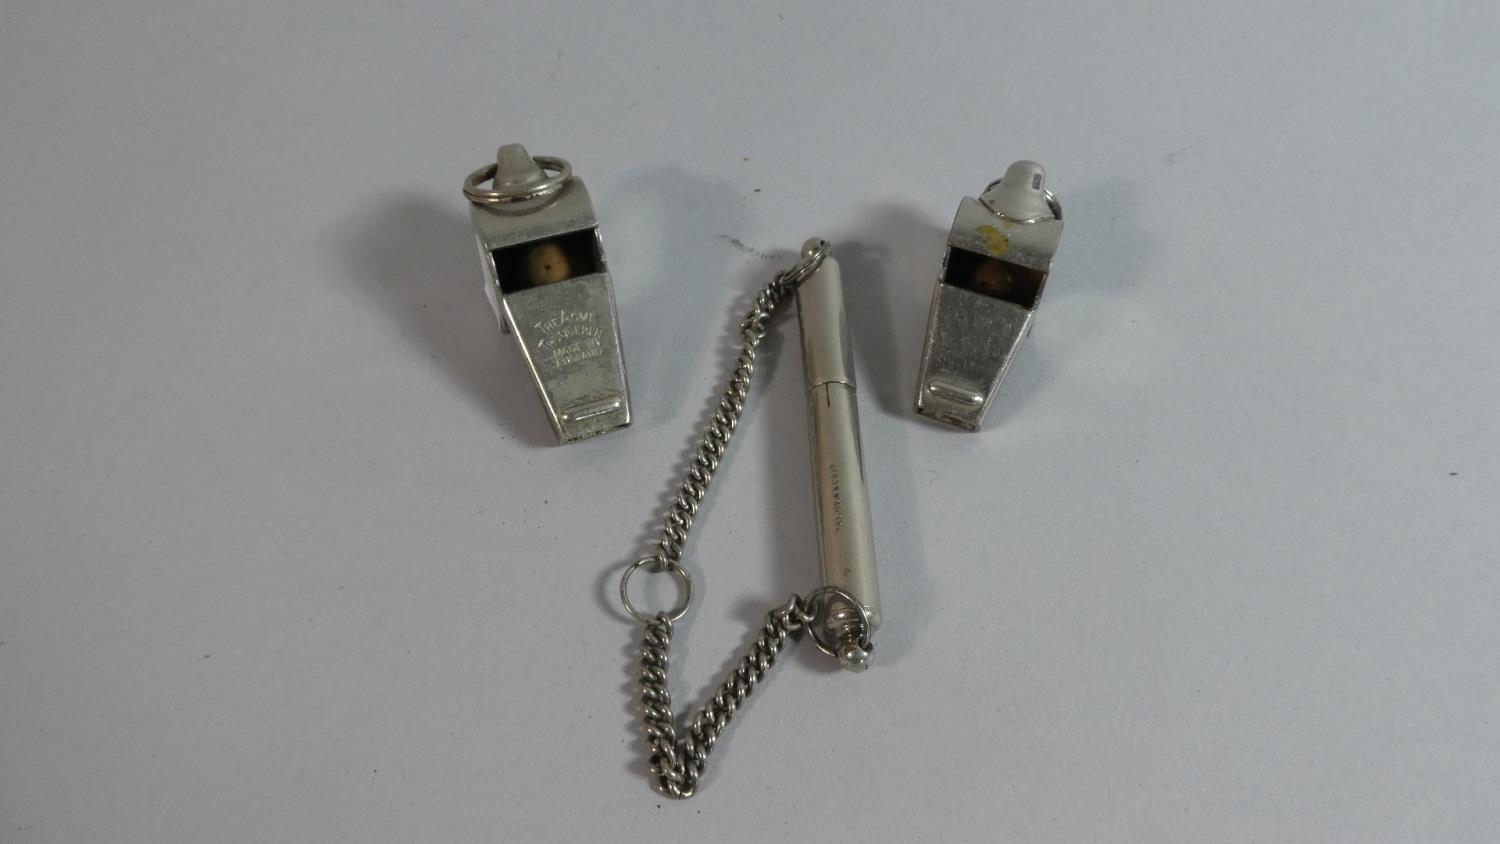 An Acme Thunderer Whistle, Trench Type Whistle Inscribed 293/14/L1795 and with Impressed Crown